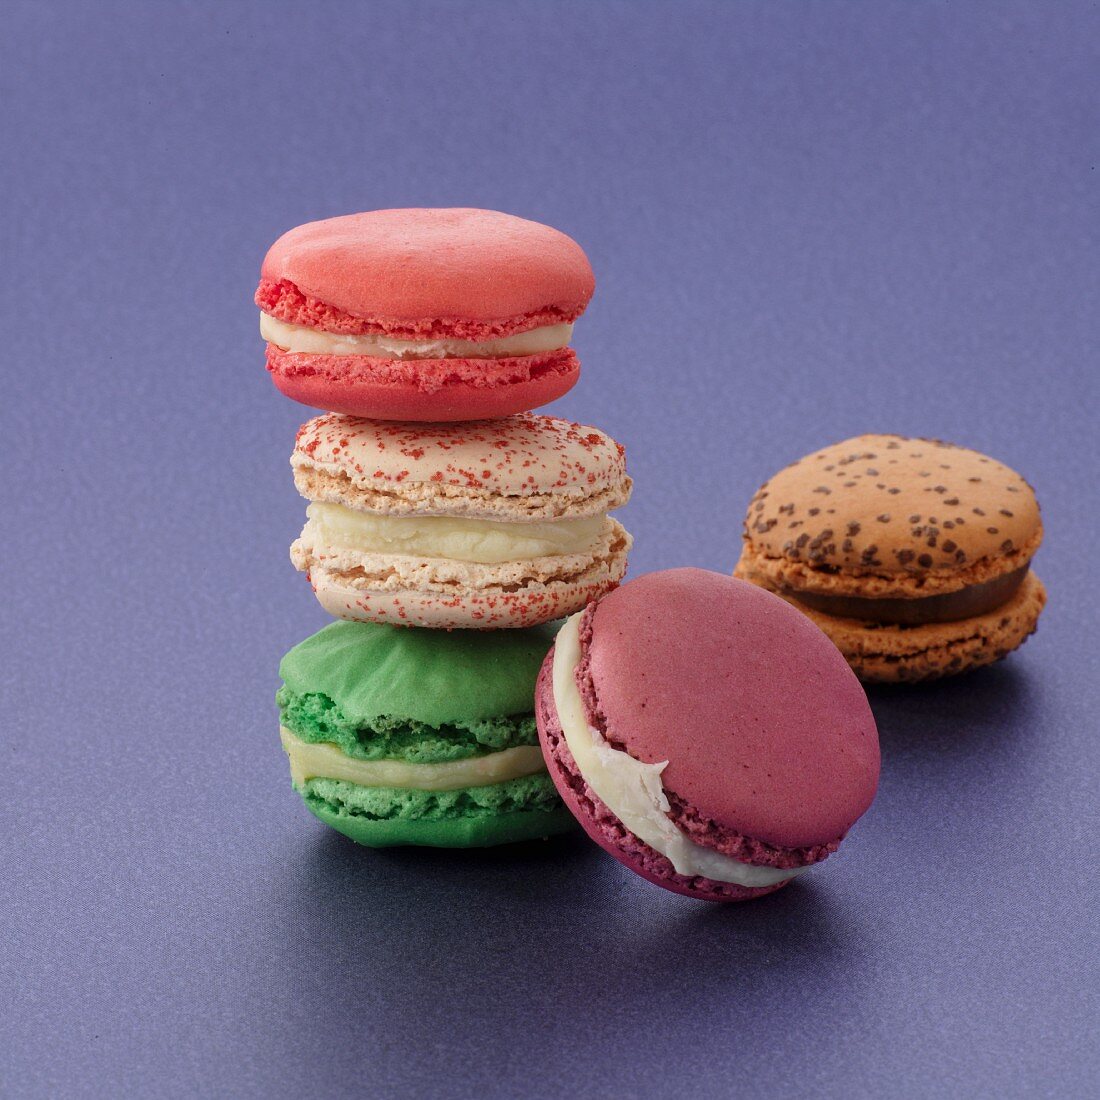 Five different macarons